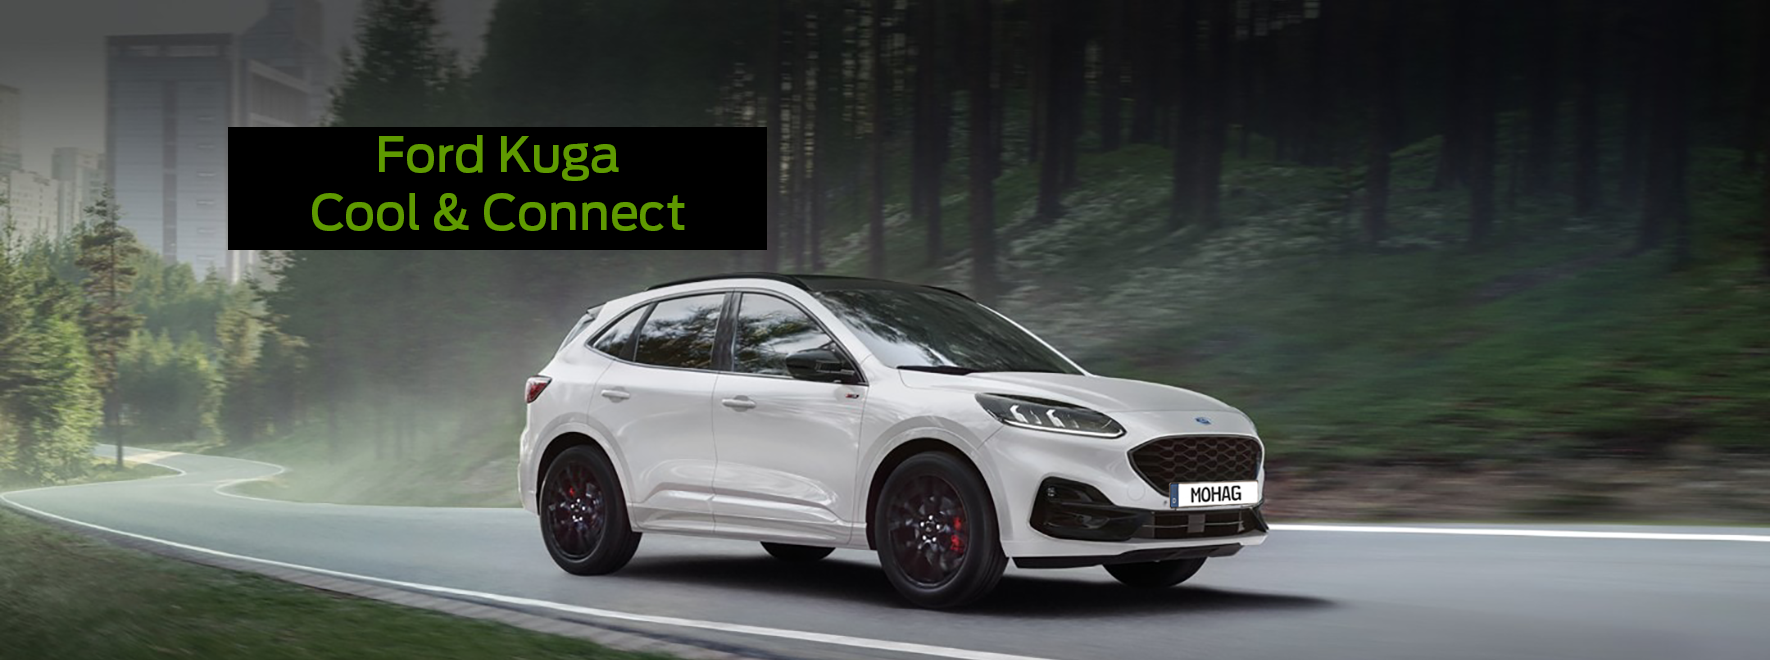 FORD KUGA Cool & Connect | 2.5l Duratec (PHEV) 165 kW (225 PS), CVT-Automatikgetriebe